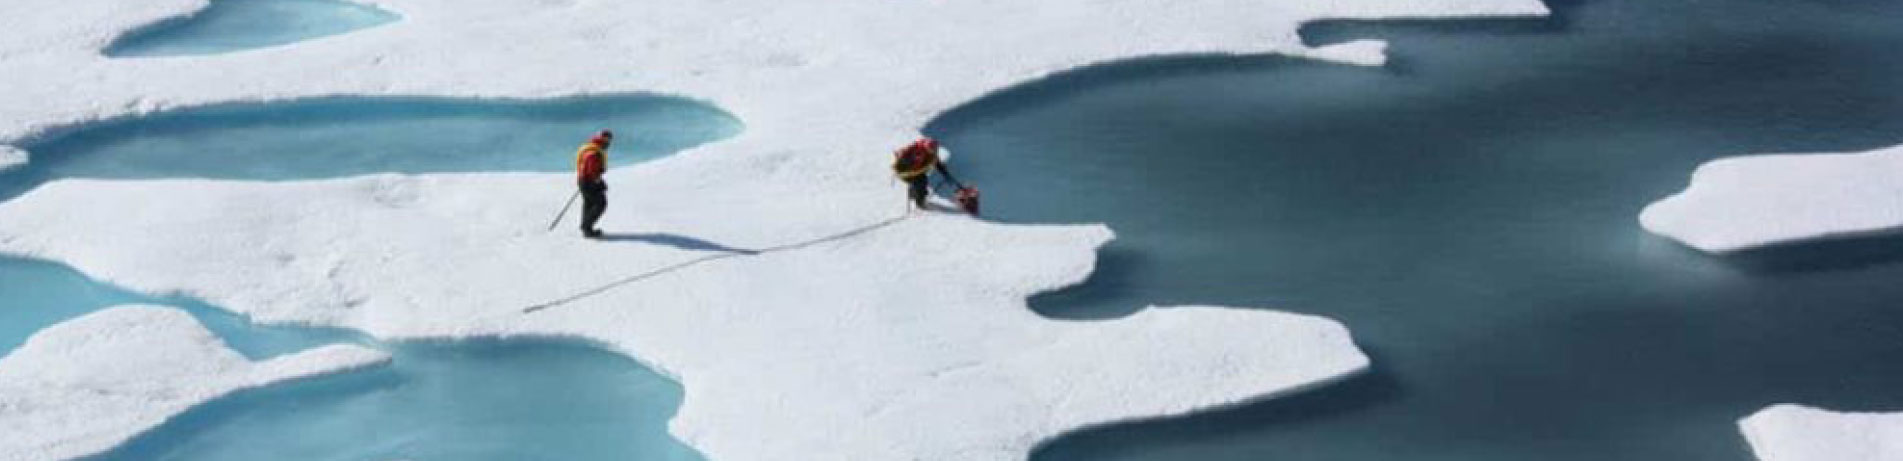 Scientists taking measurements on polar ice